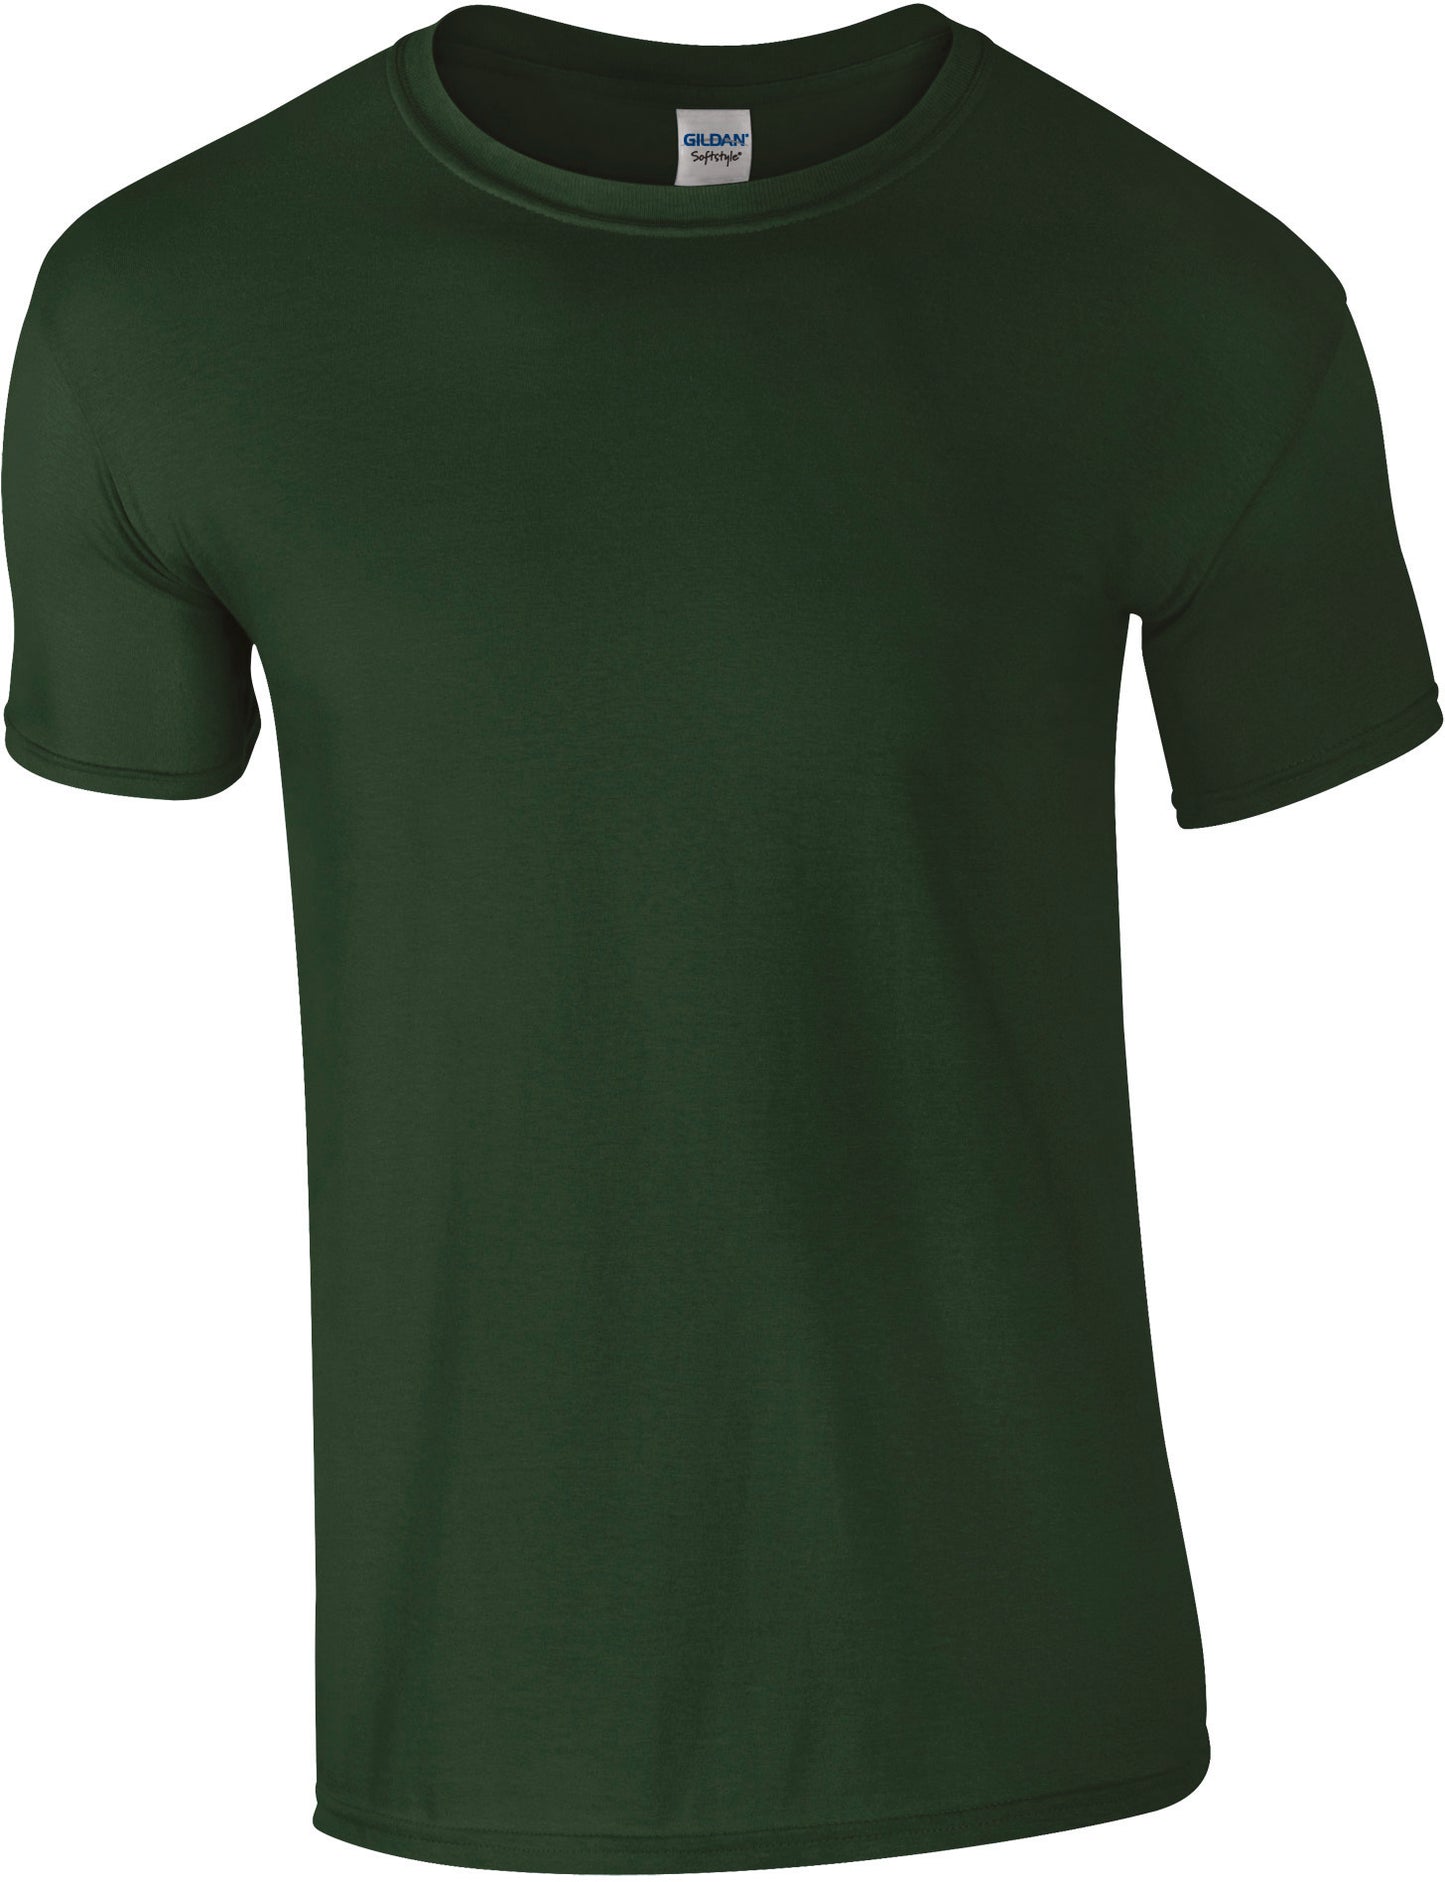 Softstyle Euro Fit Adult T-shirt